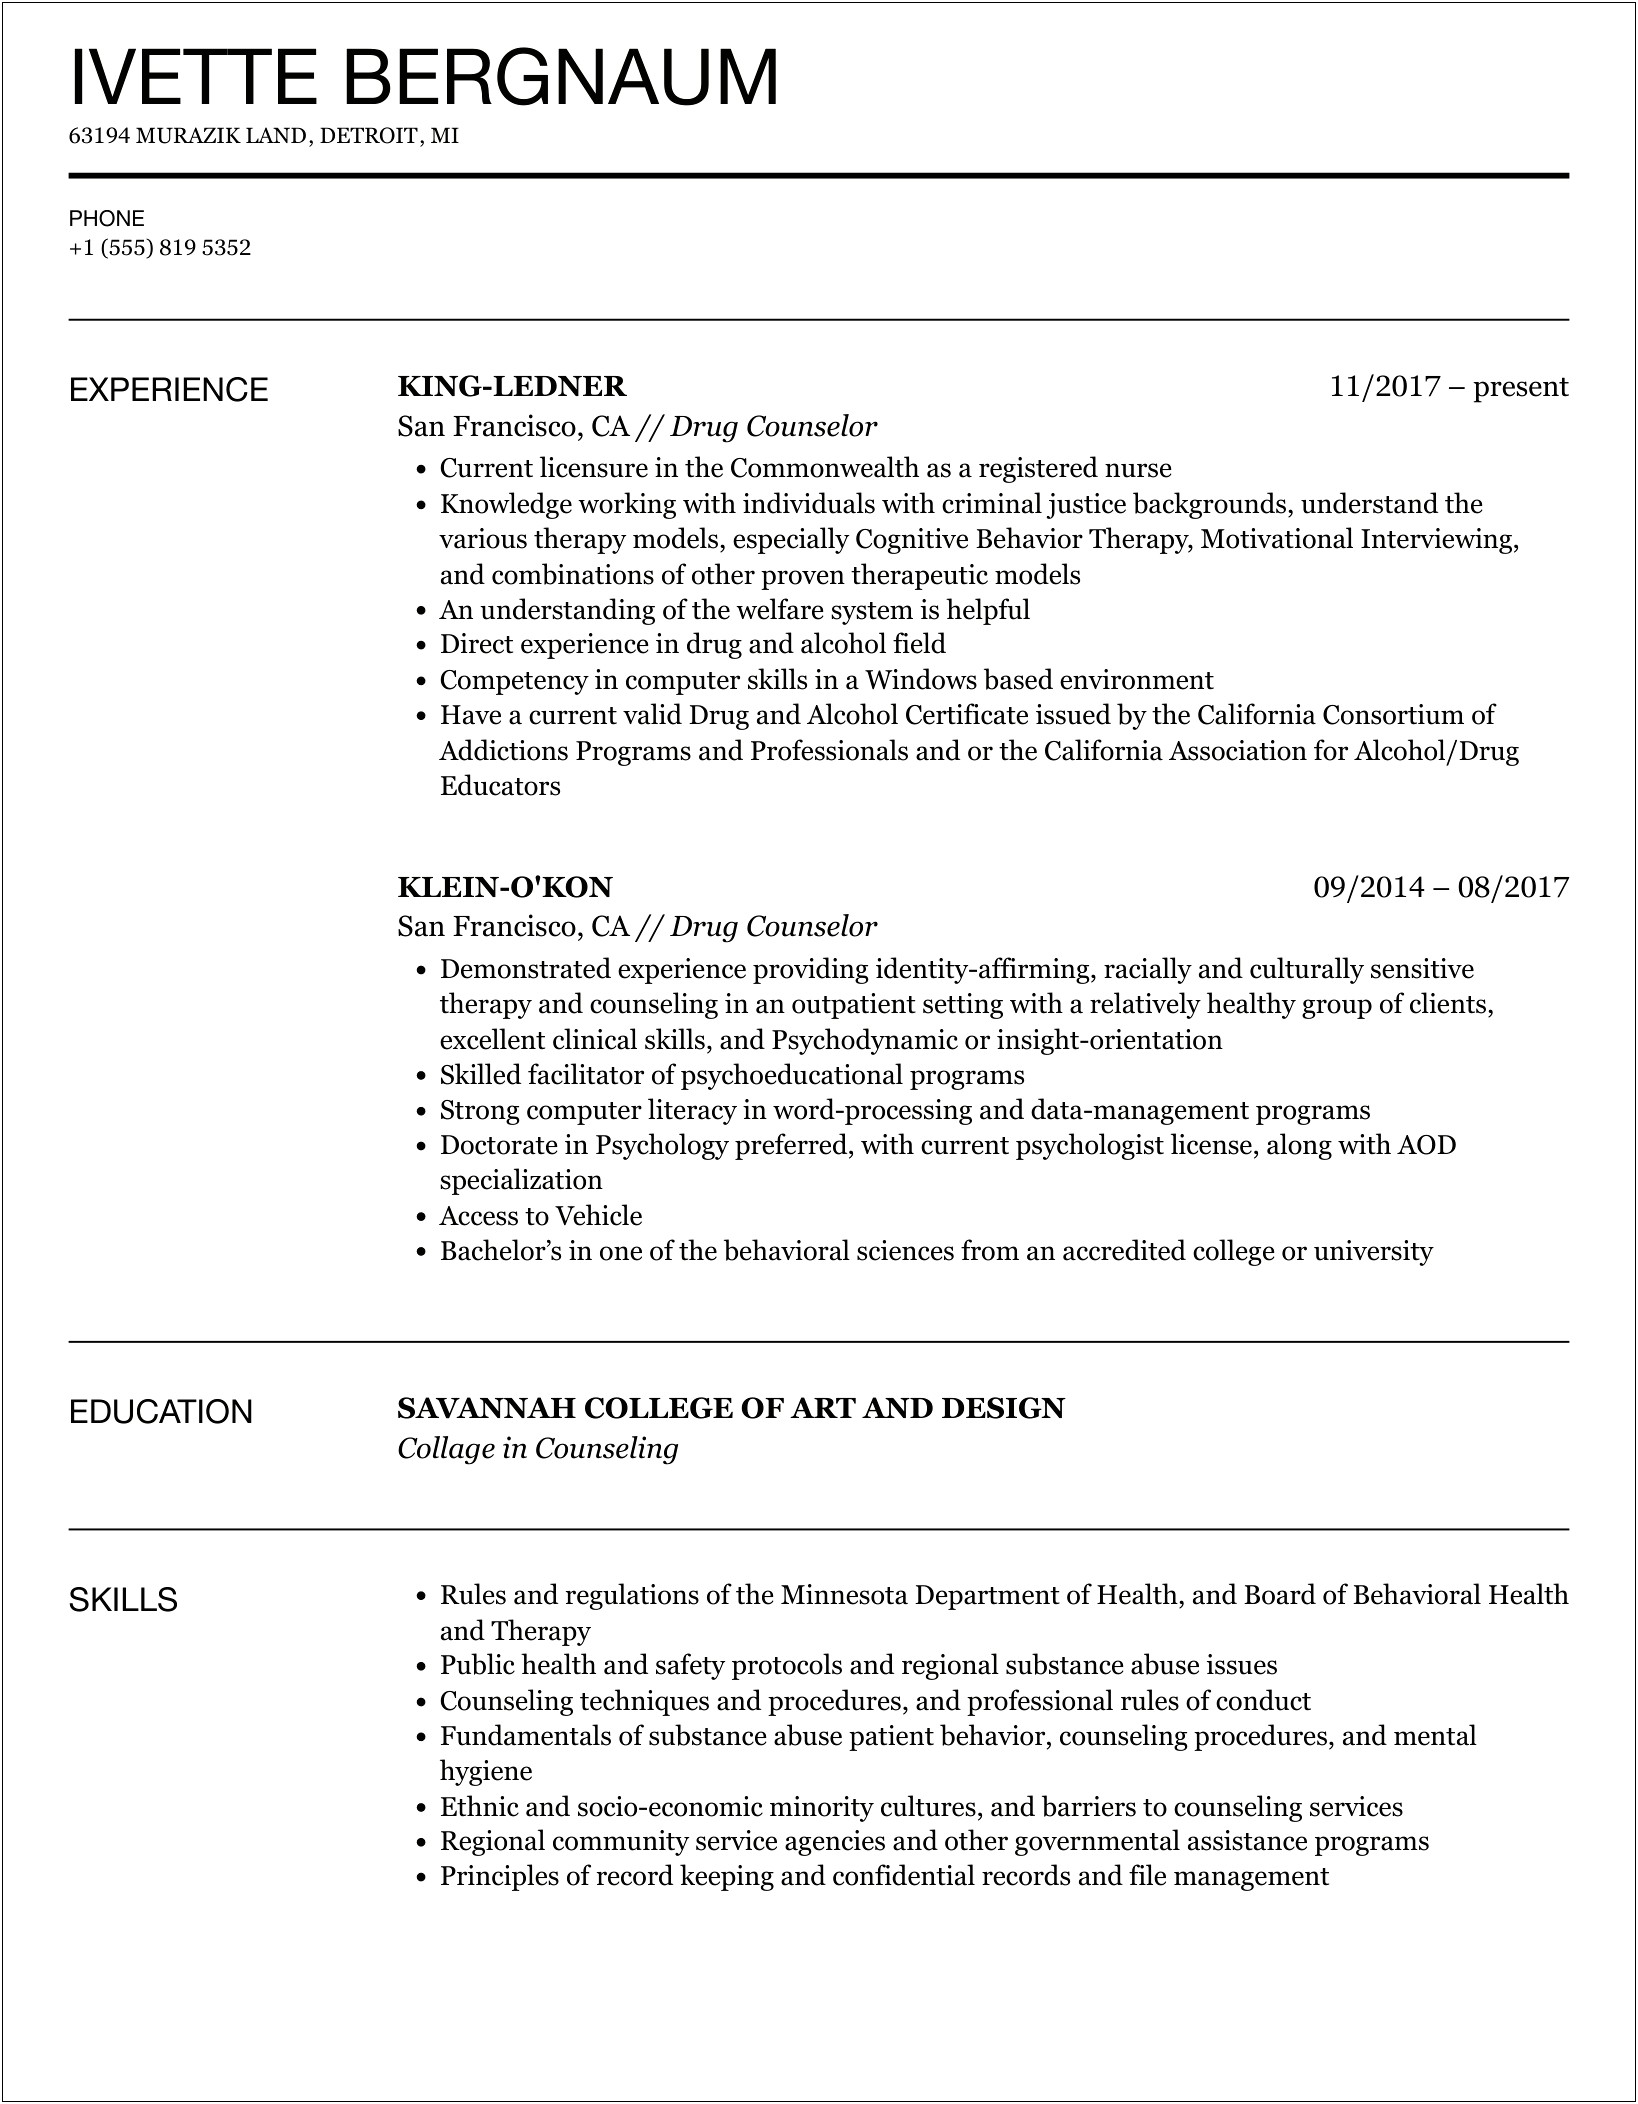 Sample Resume Summary For Addiction Counselor